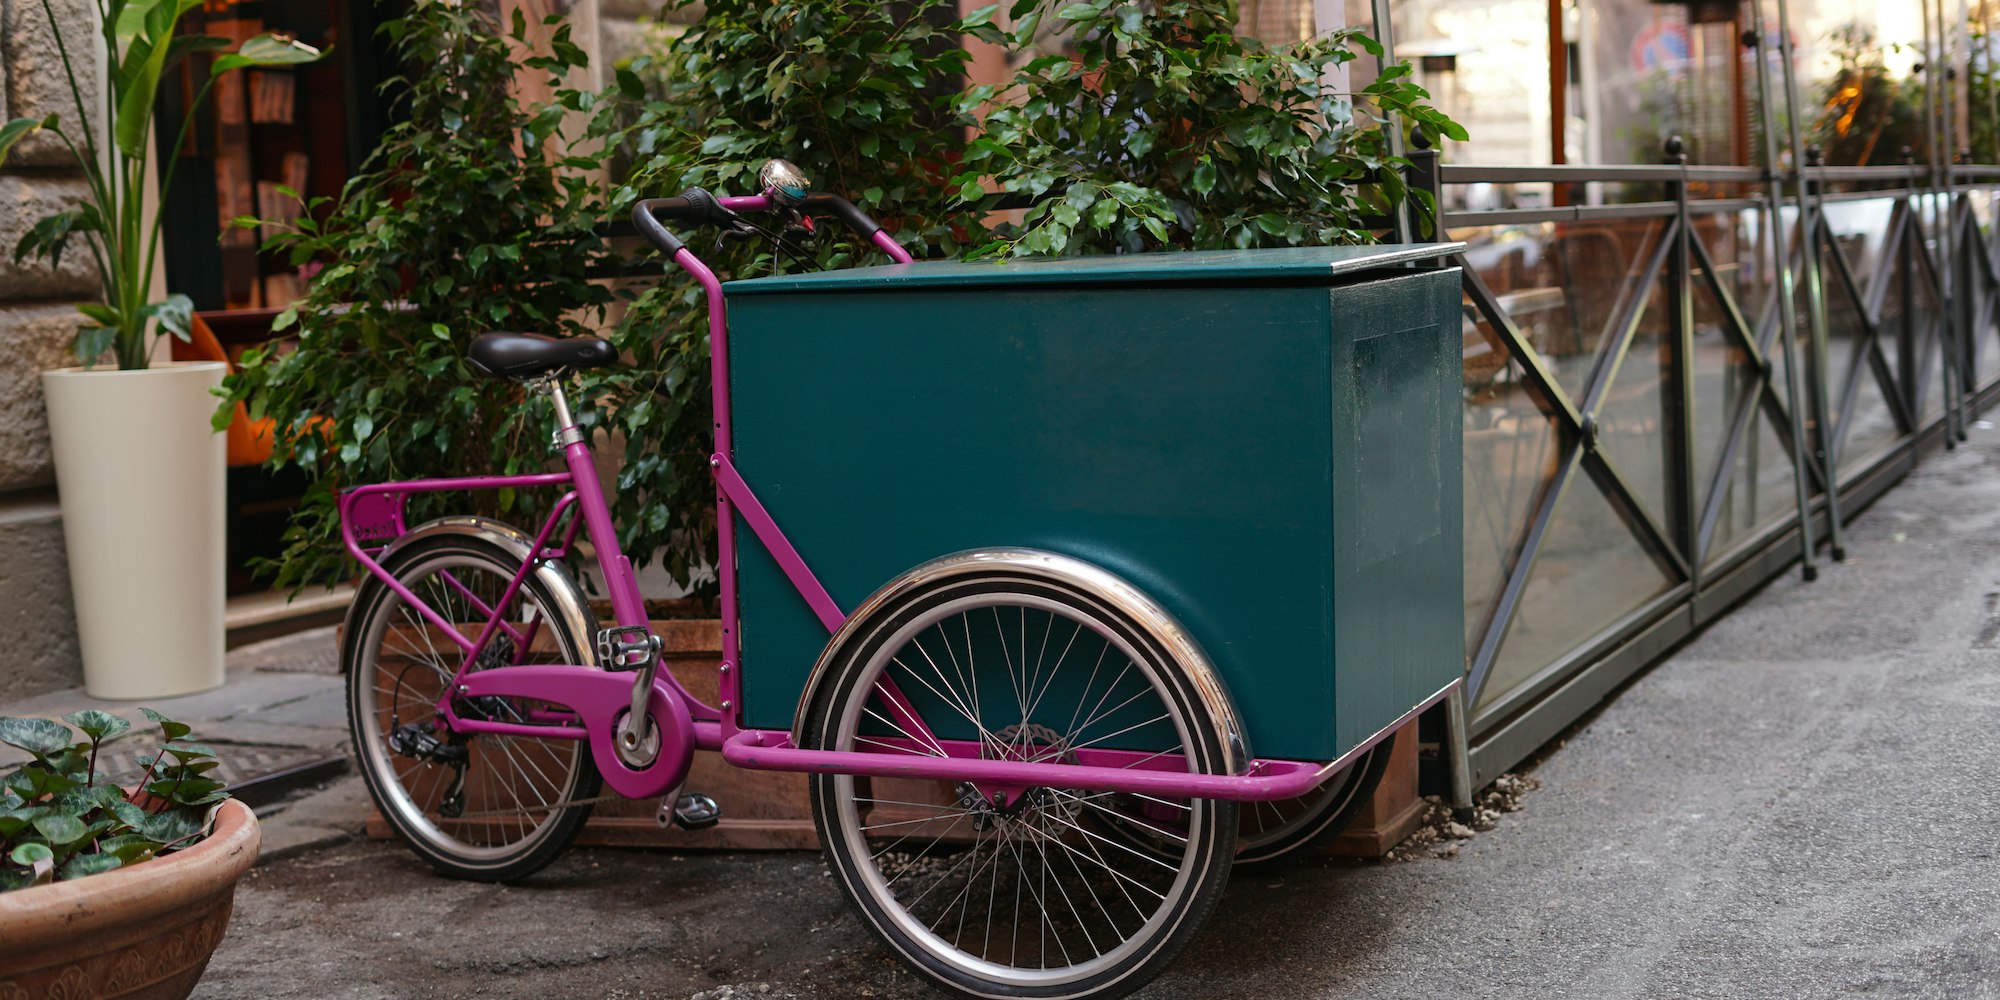 Cover Image for Cargo Bikes 101 - Why Electric Cargo Bikes Are Perfect For Your Last-mile Fleet